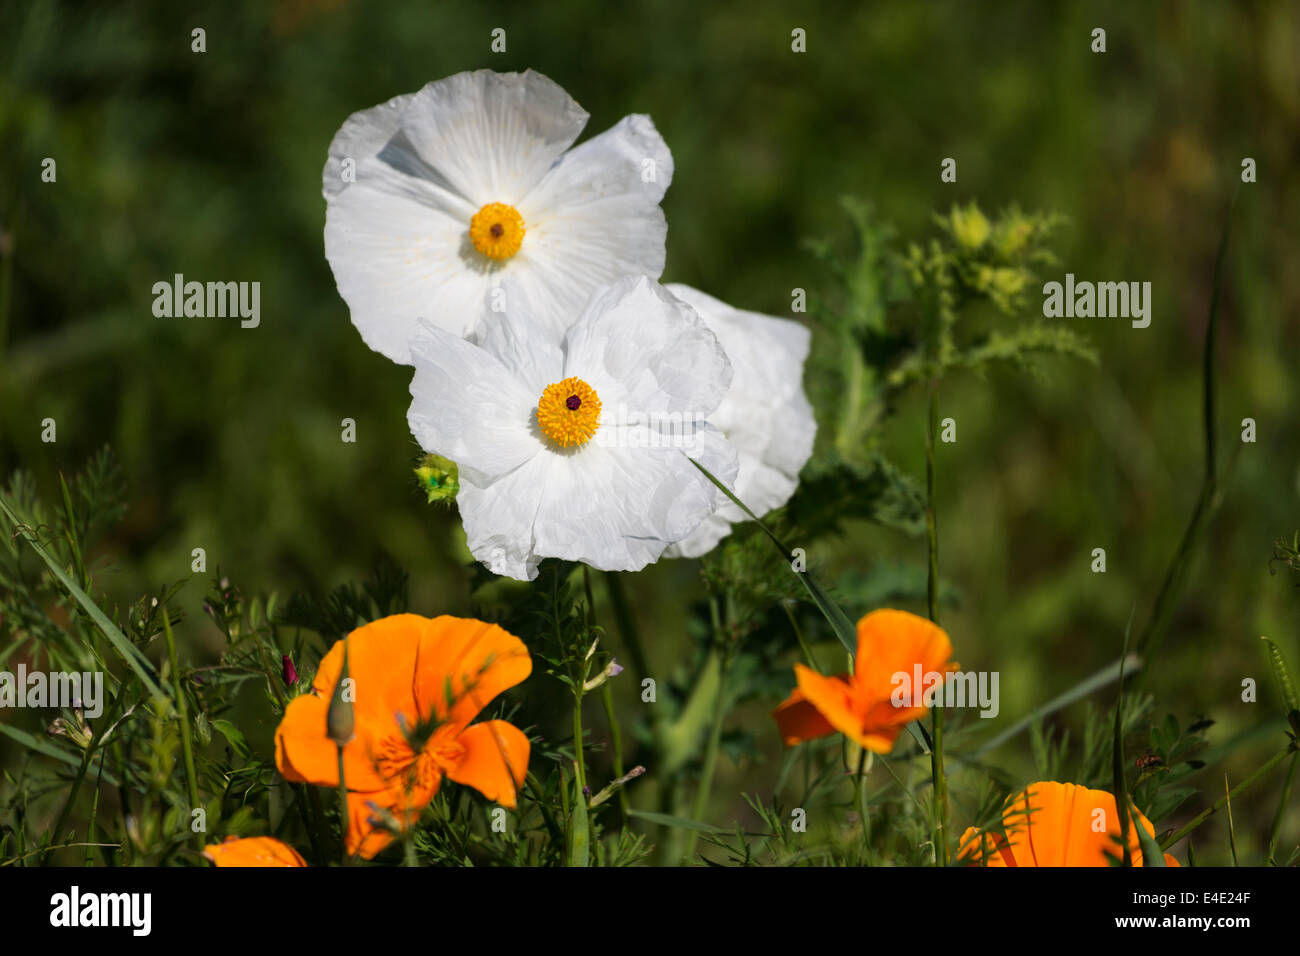 California tree poppies with golden poppies.  Found in the Warner W. Plahs Wildflower Field in the Sea Pines Forest Preserve, Hi Stock Photo